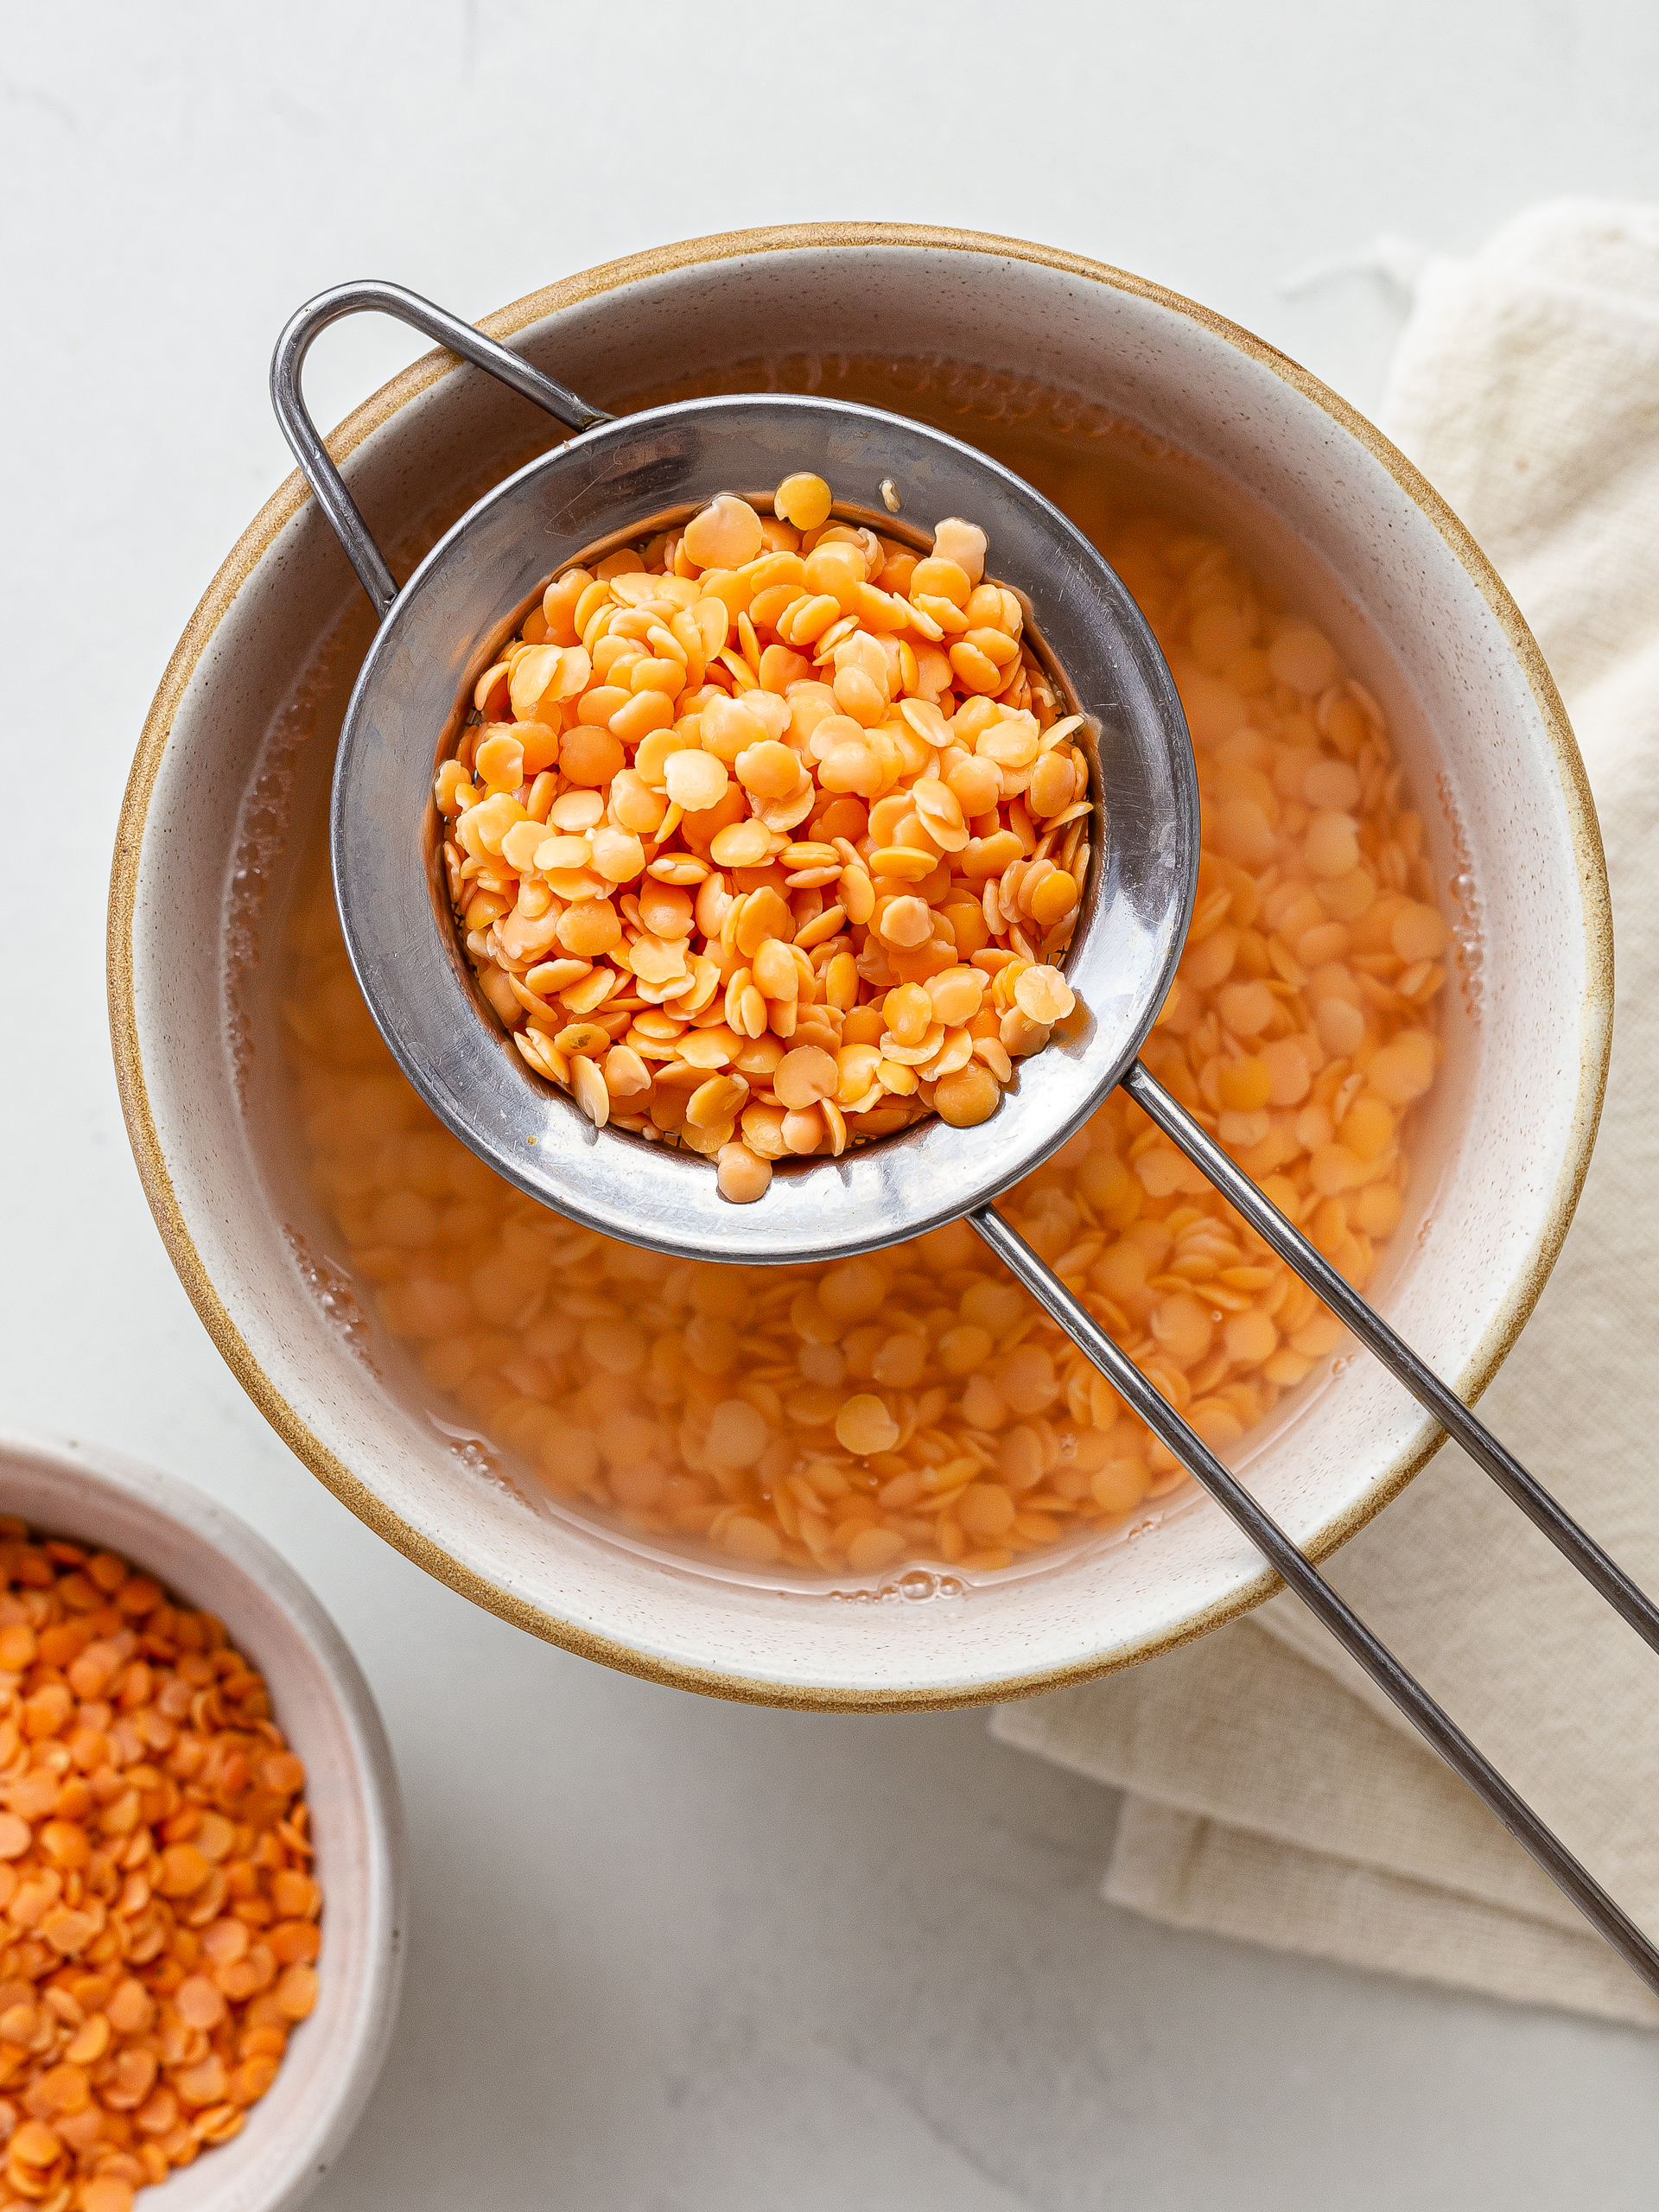 dry red lentils soaking in a bowl of water